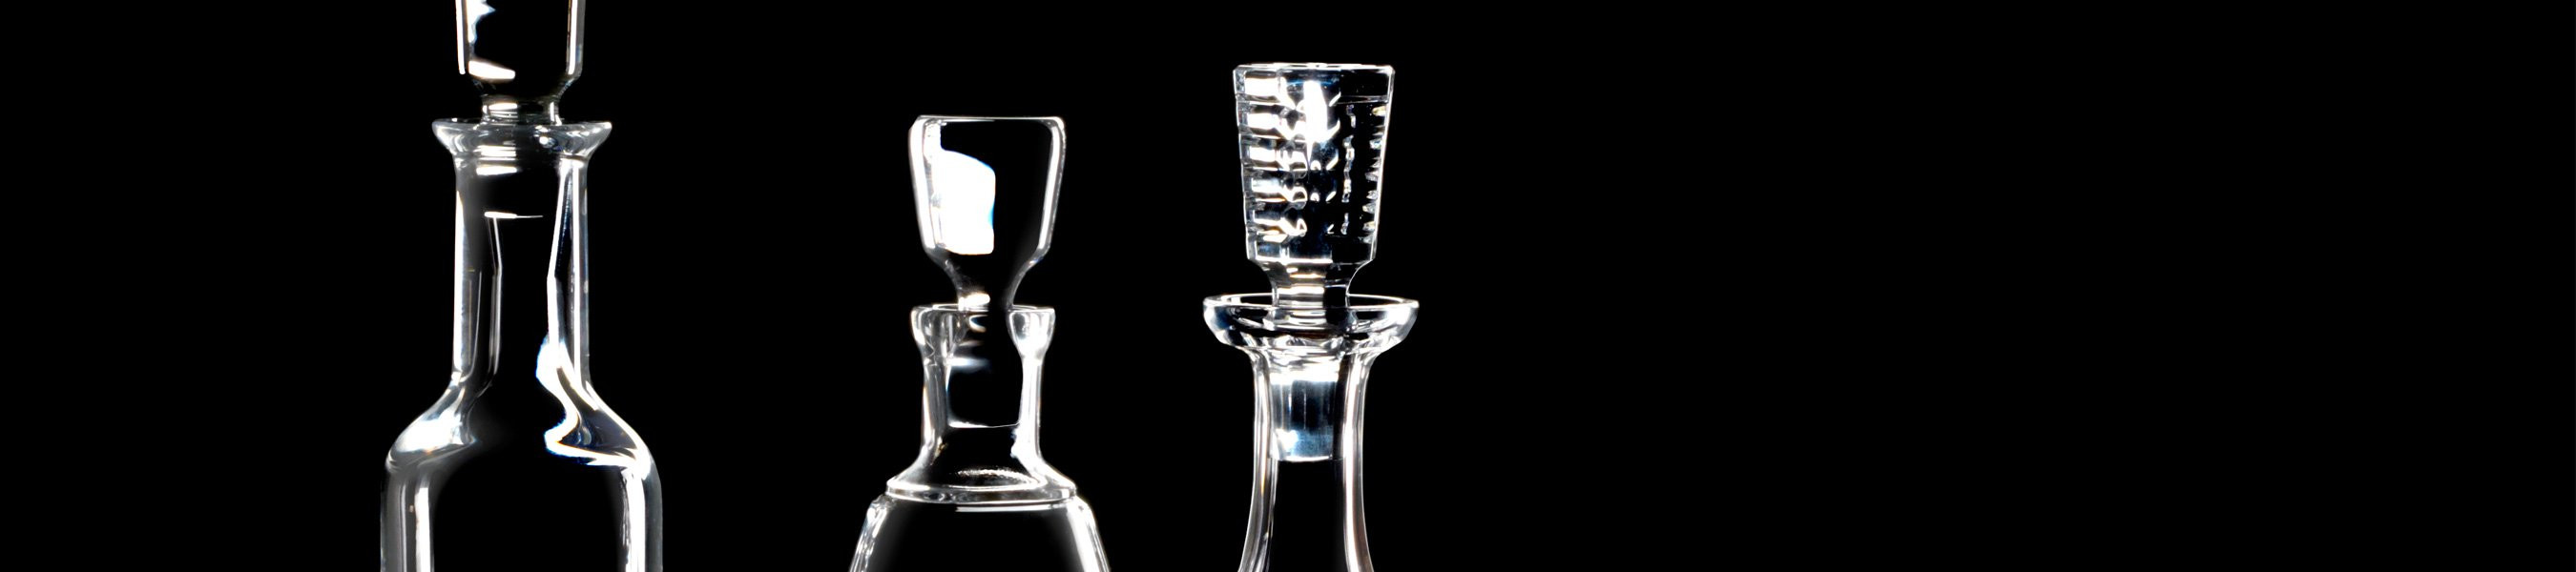 13 Lovely Waterford Lismore Thistle Vase 2024 free download waterford lismore thistle vase of crystal decanters pitchers carafes waterforda us with waterford crystal decanters pitchers carafes